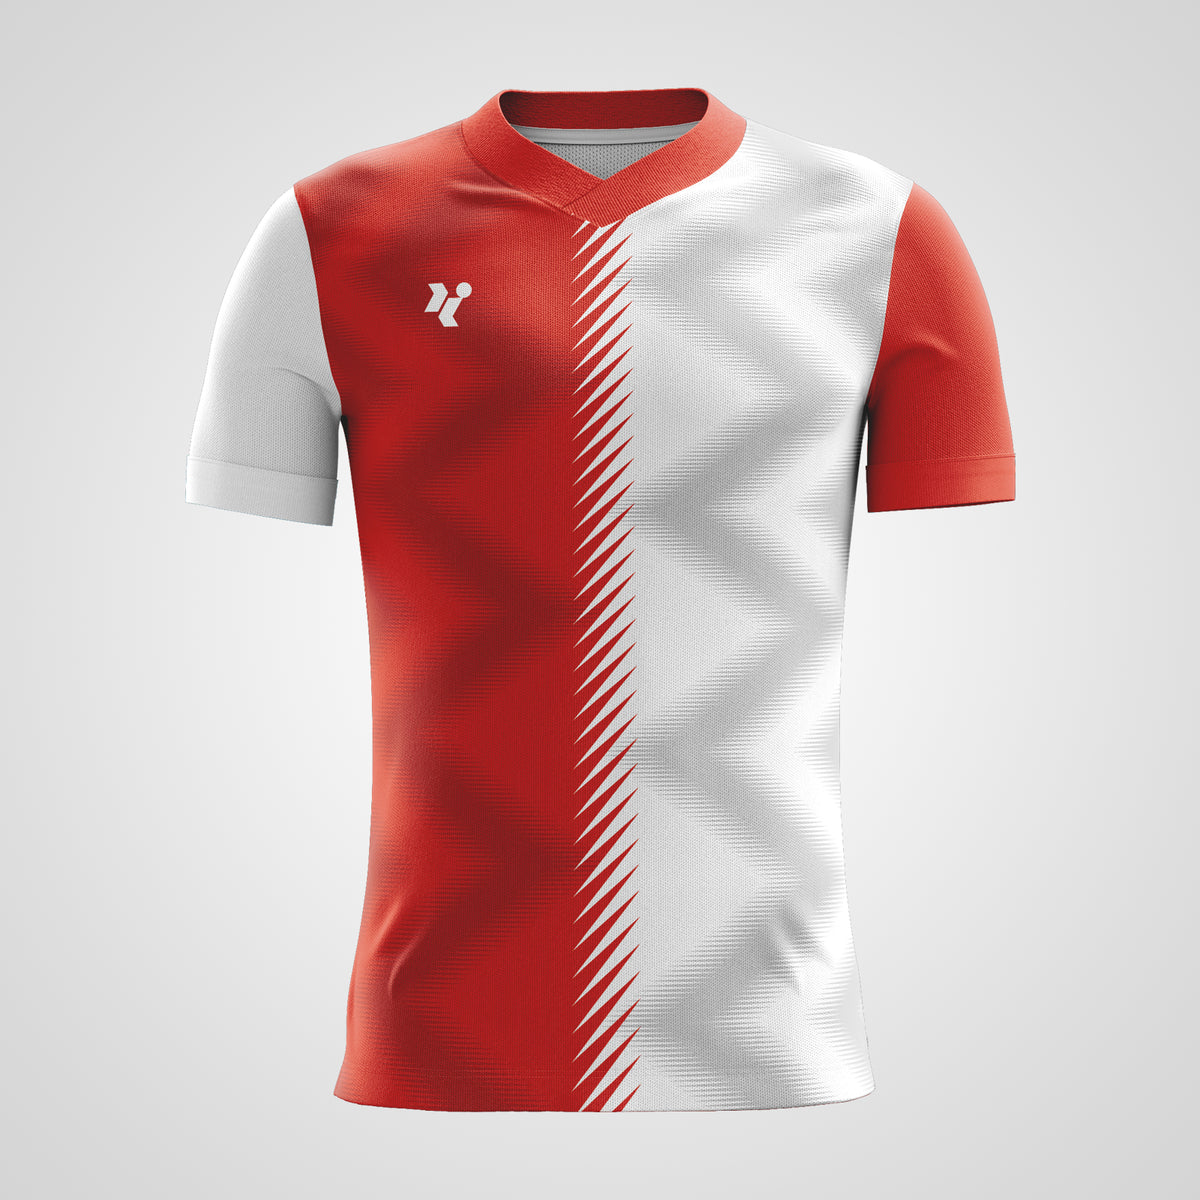 football jersey design red and white